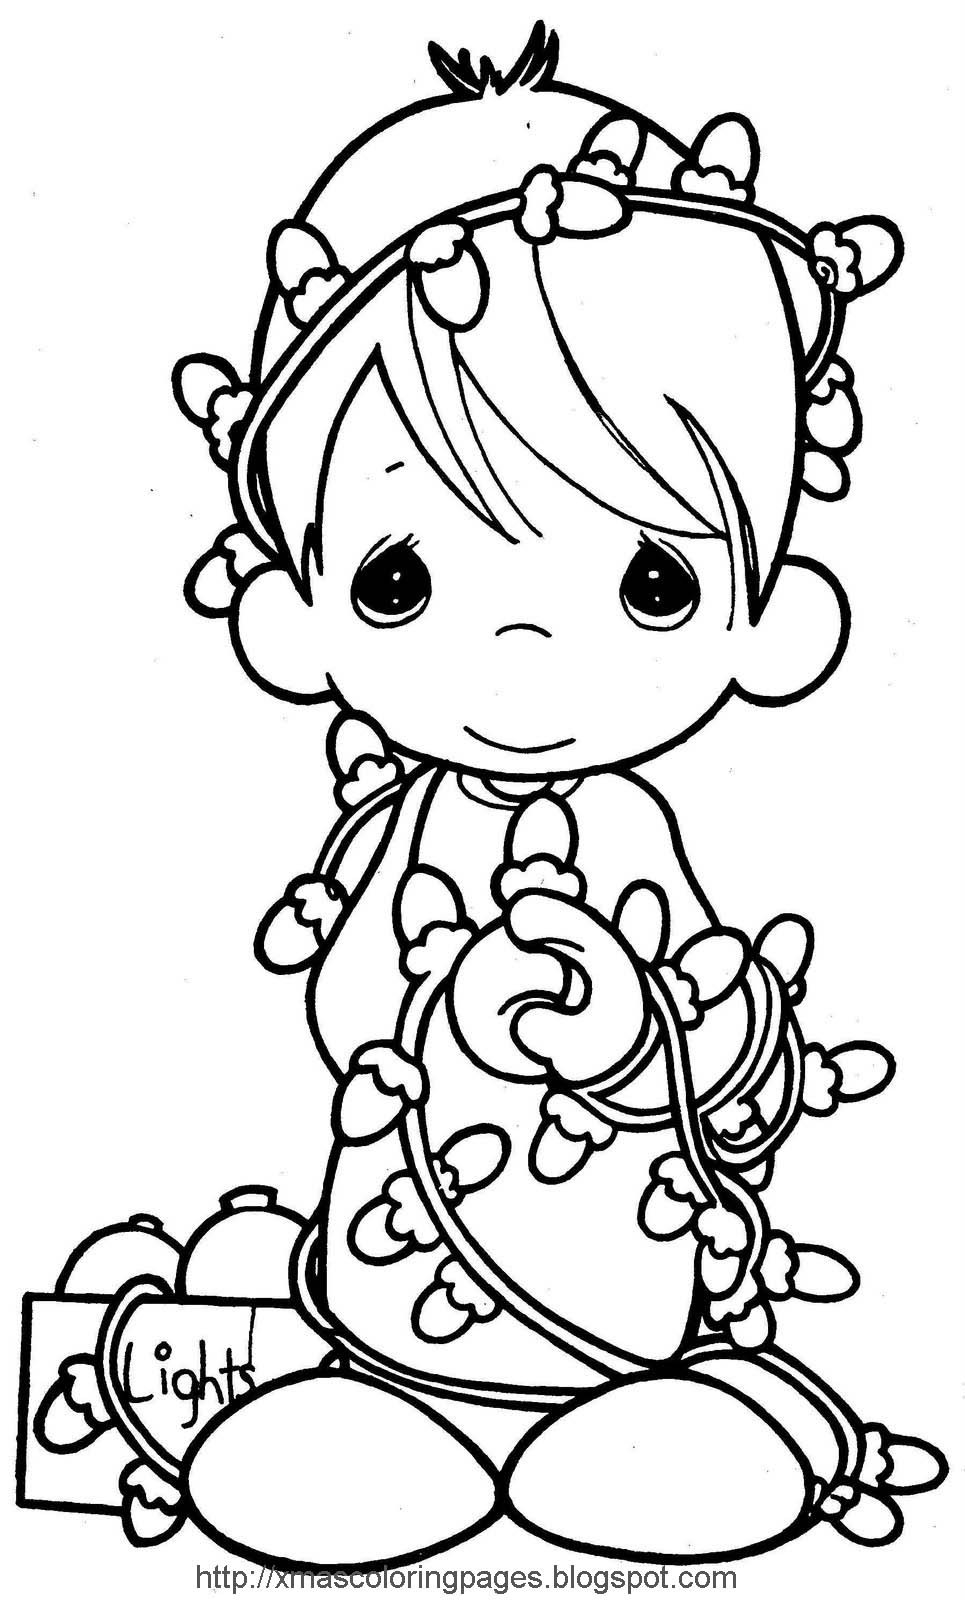 Christmas Coloring Pages Kids
 XMAS COLORING PAGES